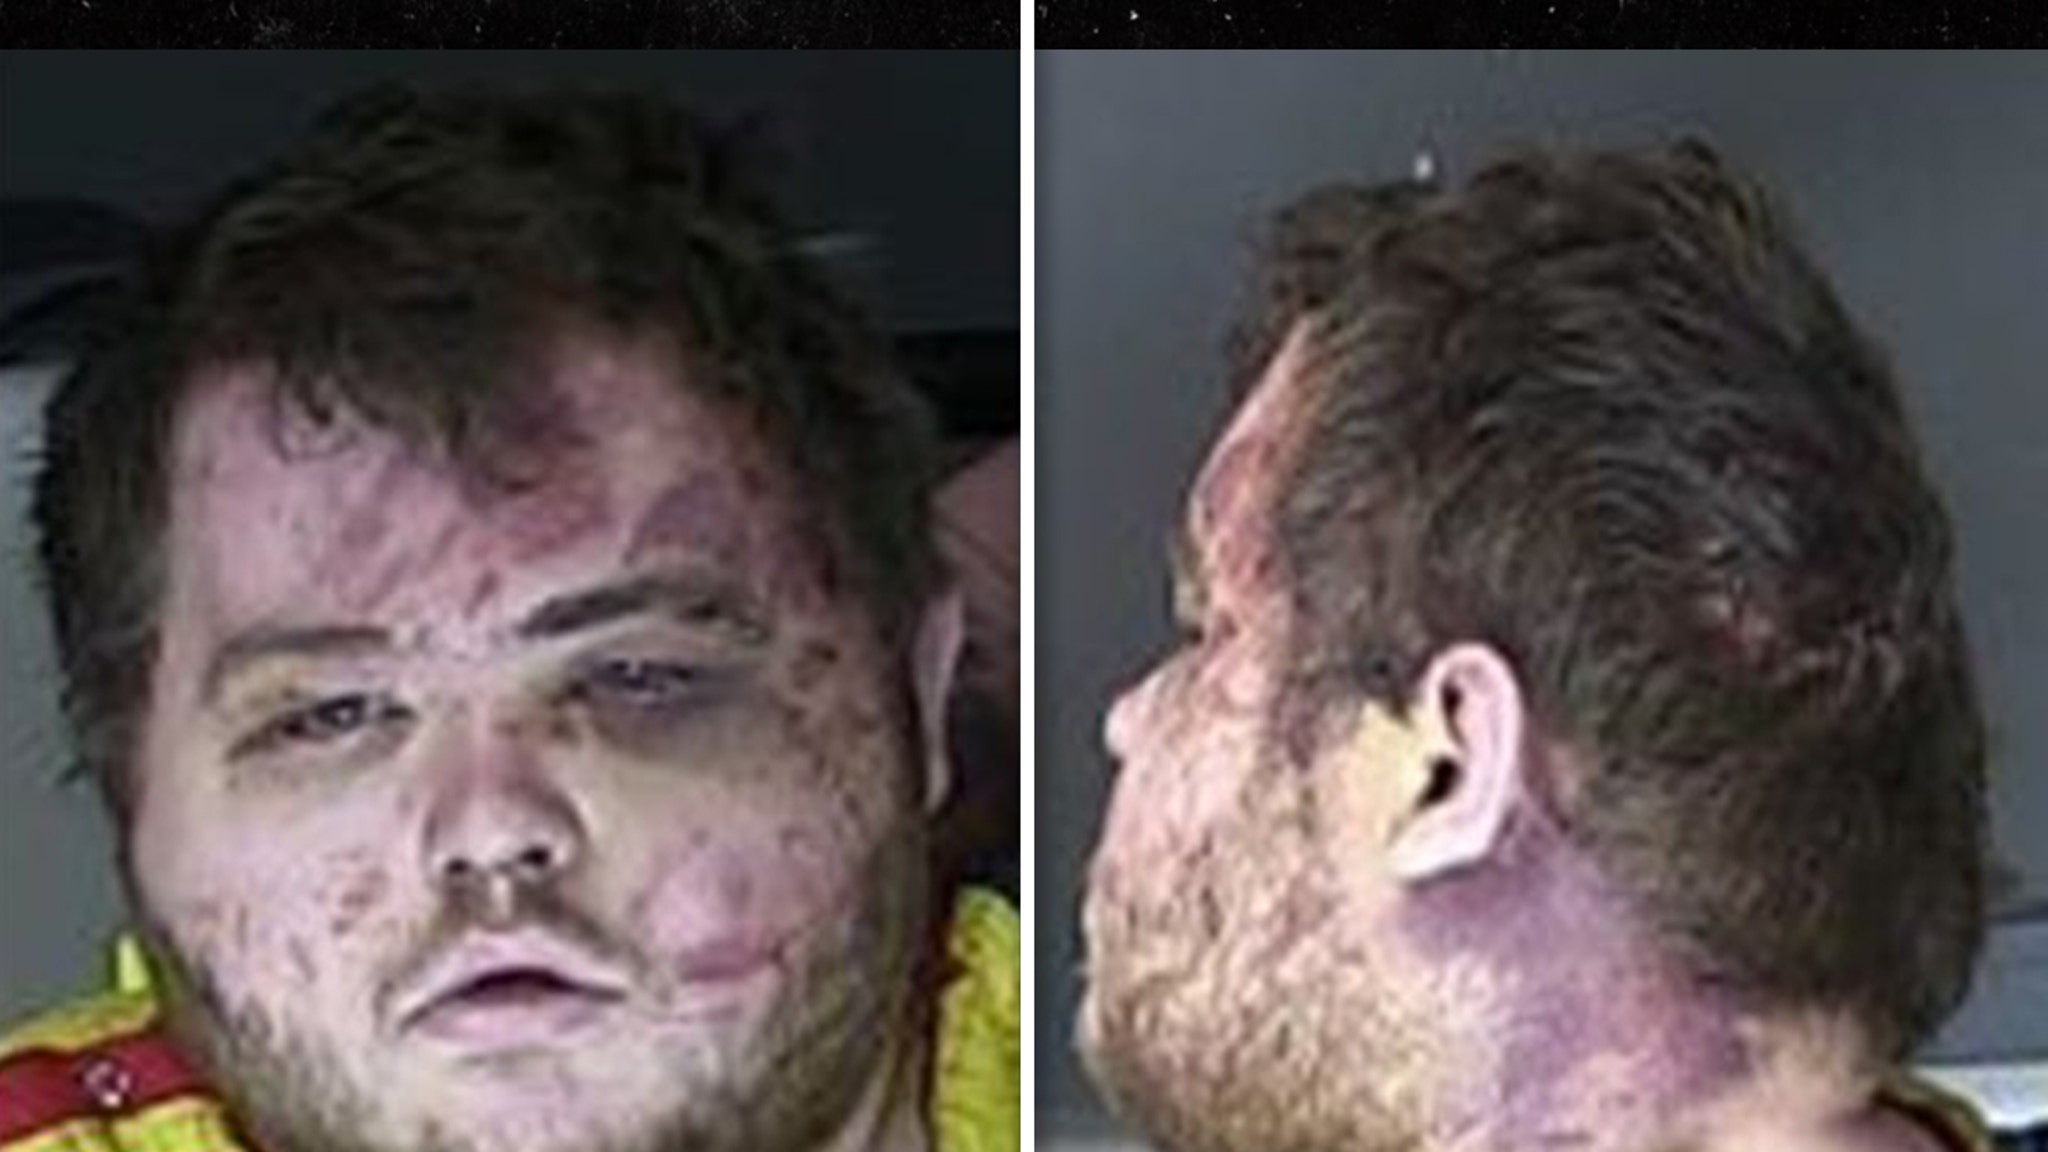 Photo of Colorado shooting suspect shows significant bruising and swelling